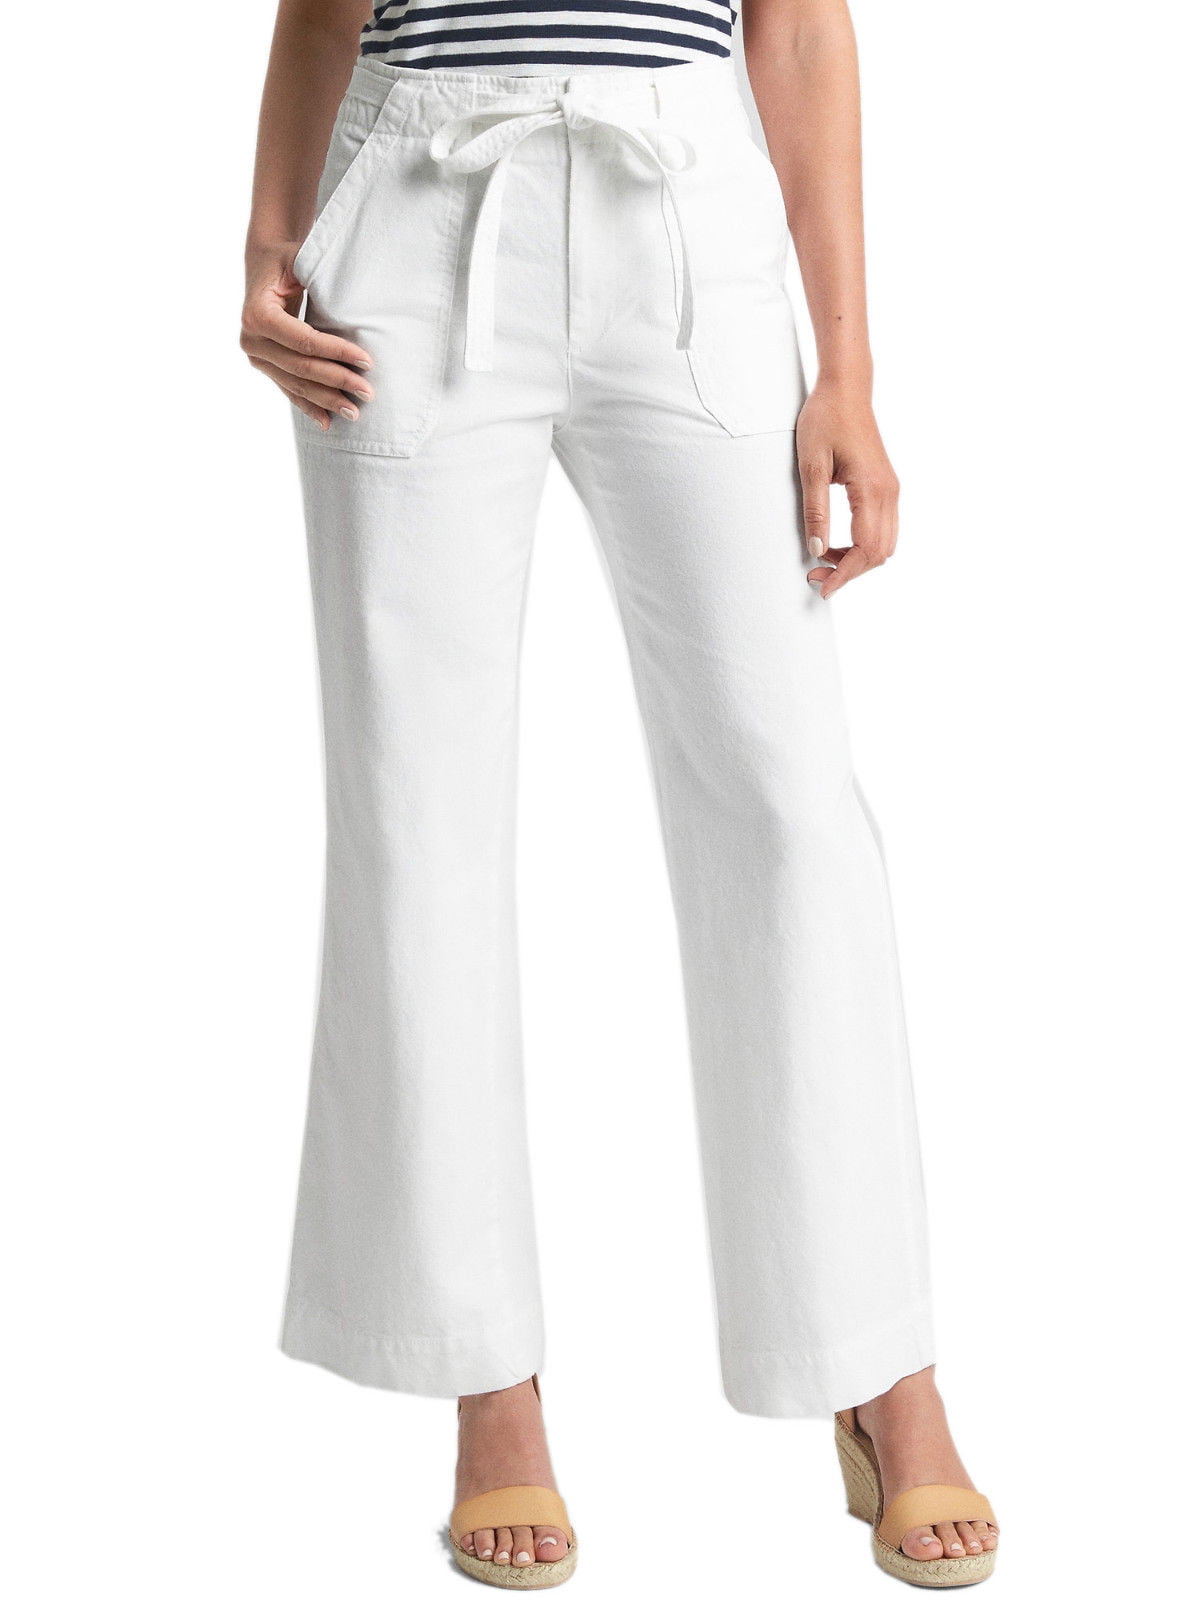 Gap - New Gap Womens Optic White Belted 100% Cotton Wide Leg Casual ...